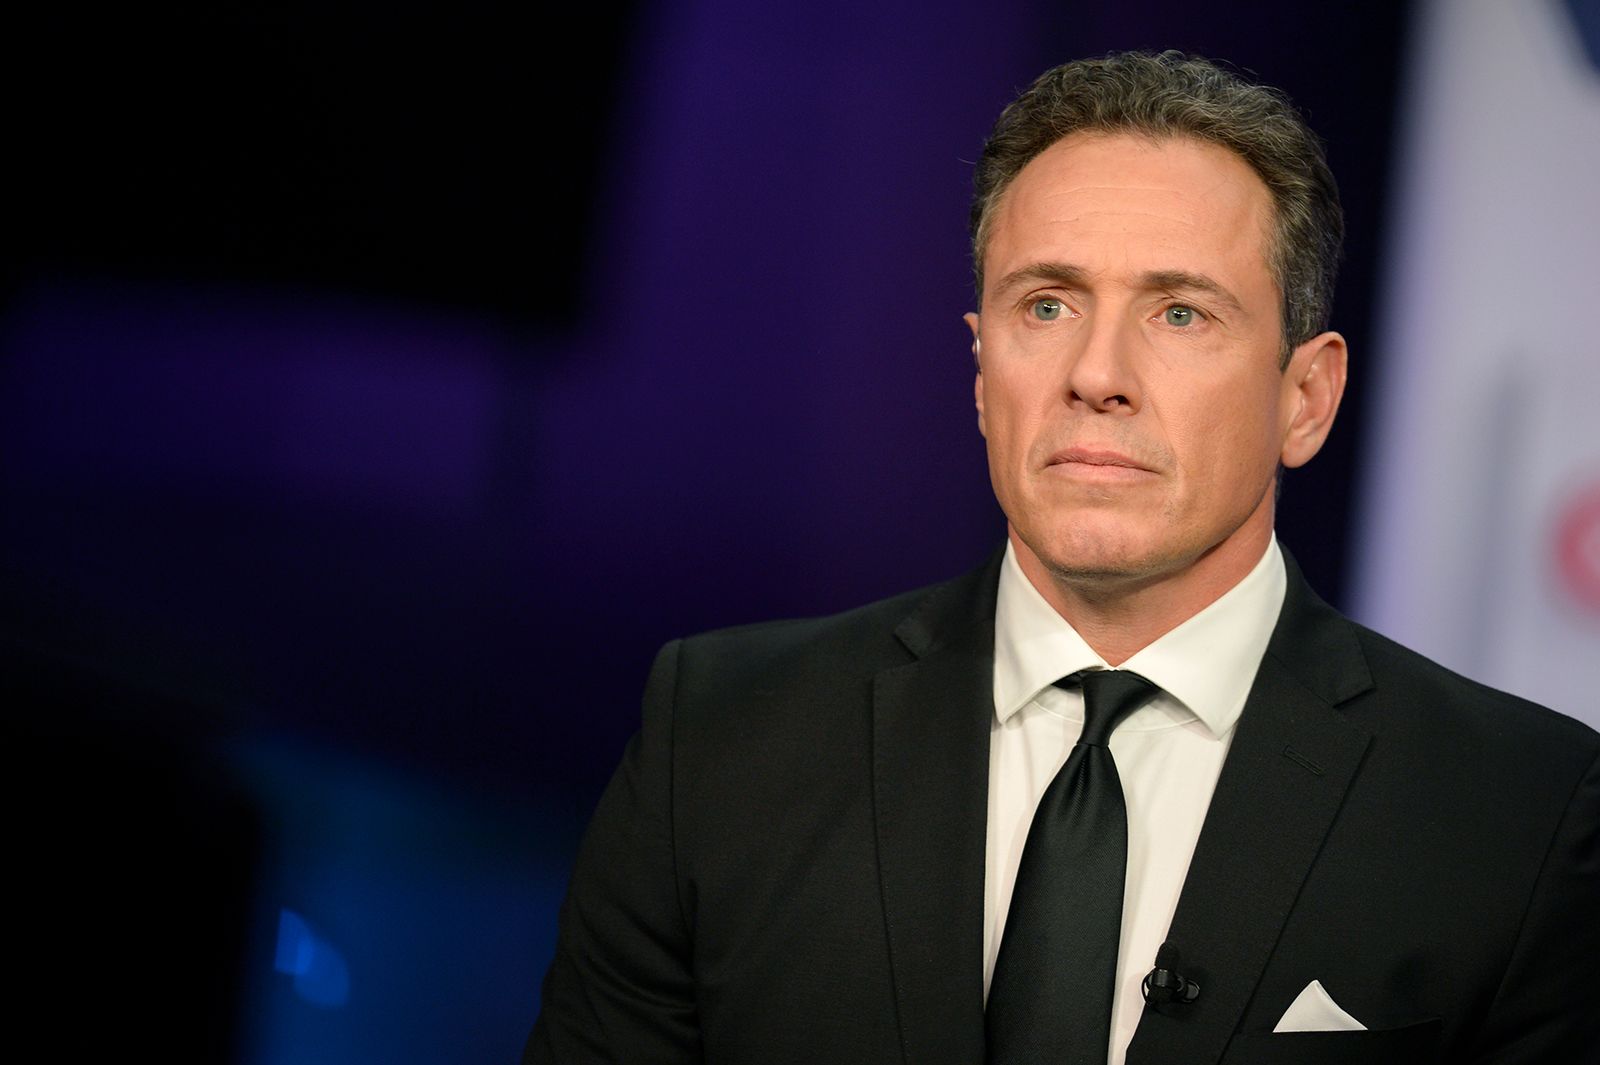 Chris Cuomo Biography, Net Worth, Age, Height, Weight, Girlfriend, Family, Fact, and More